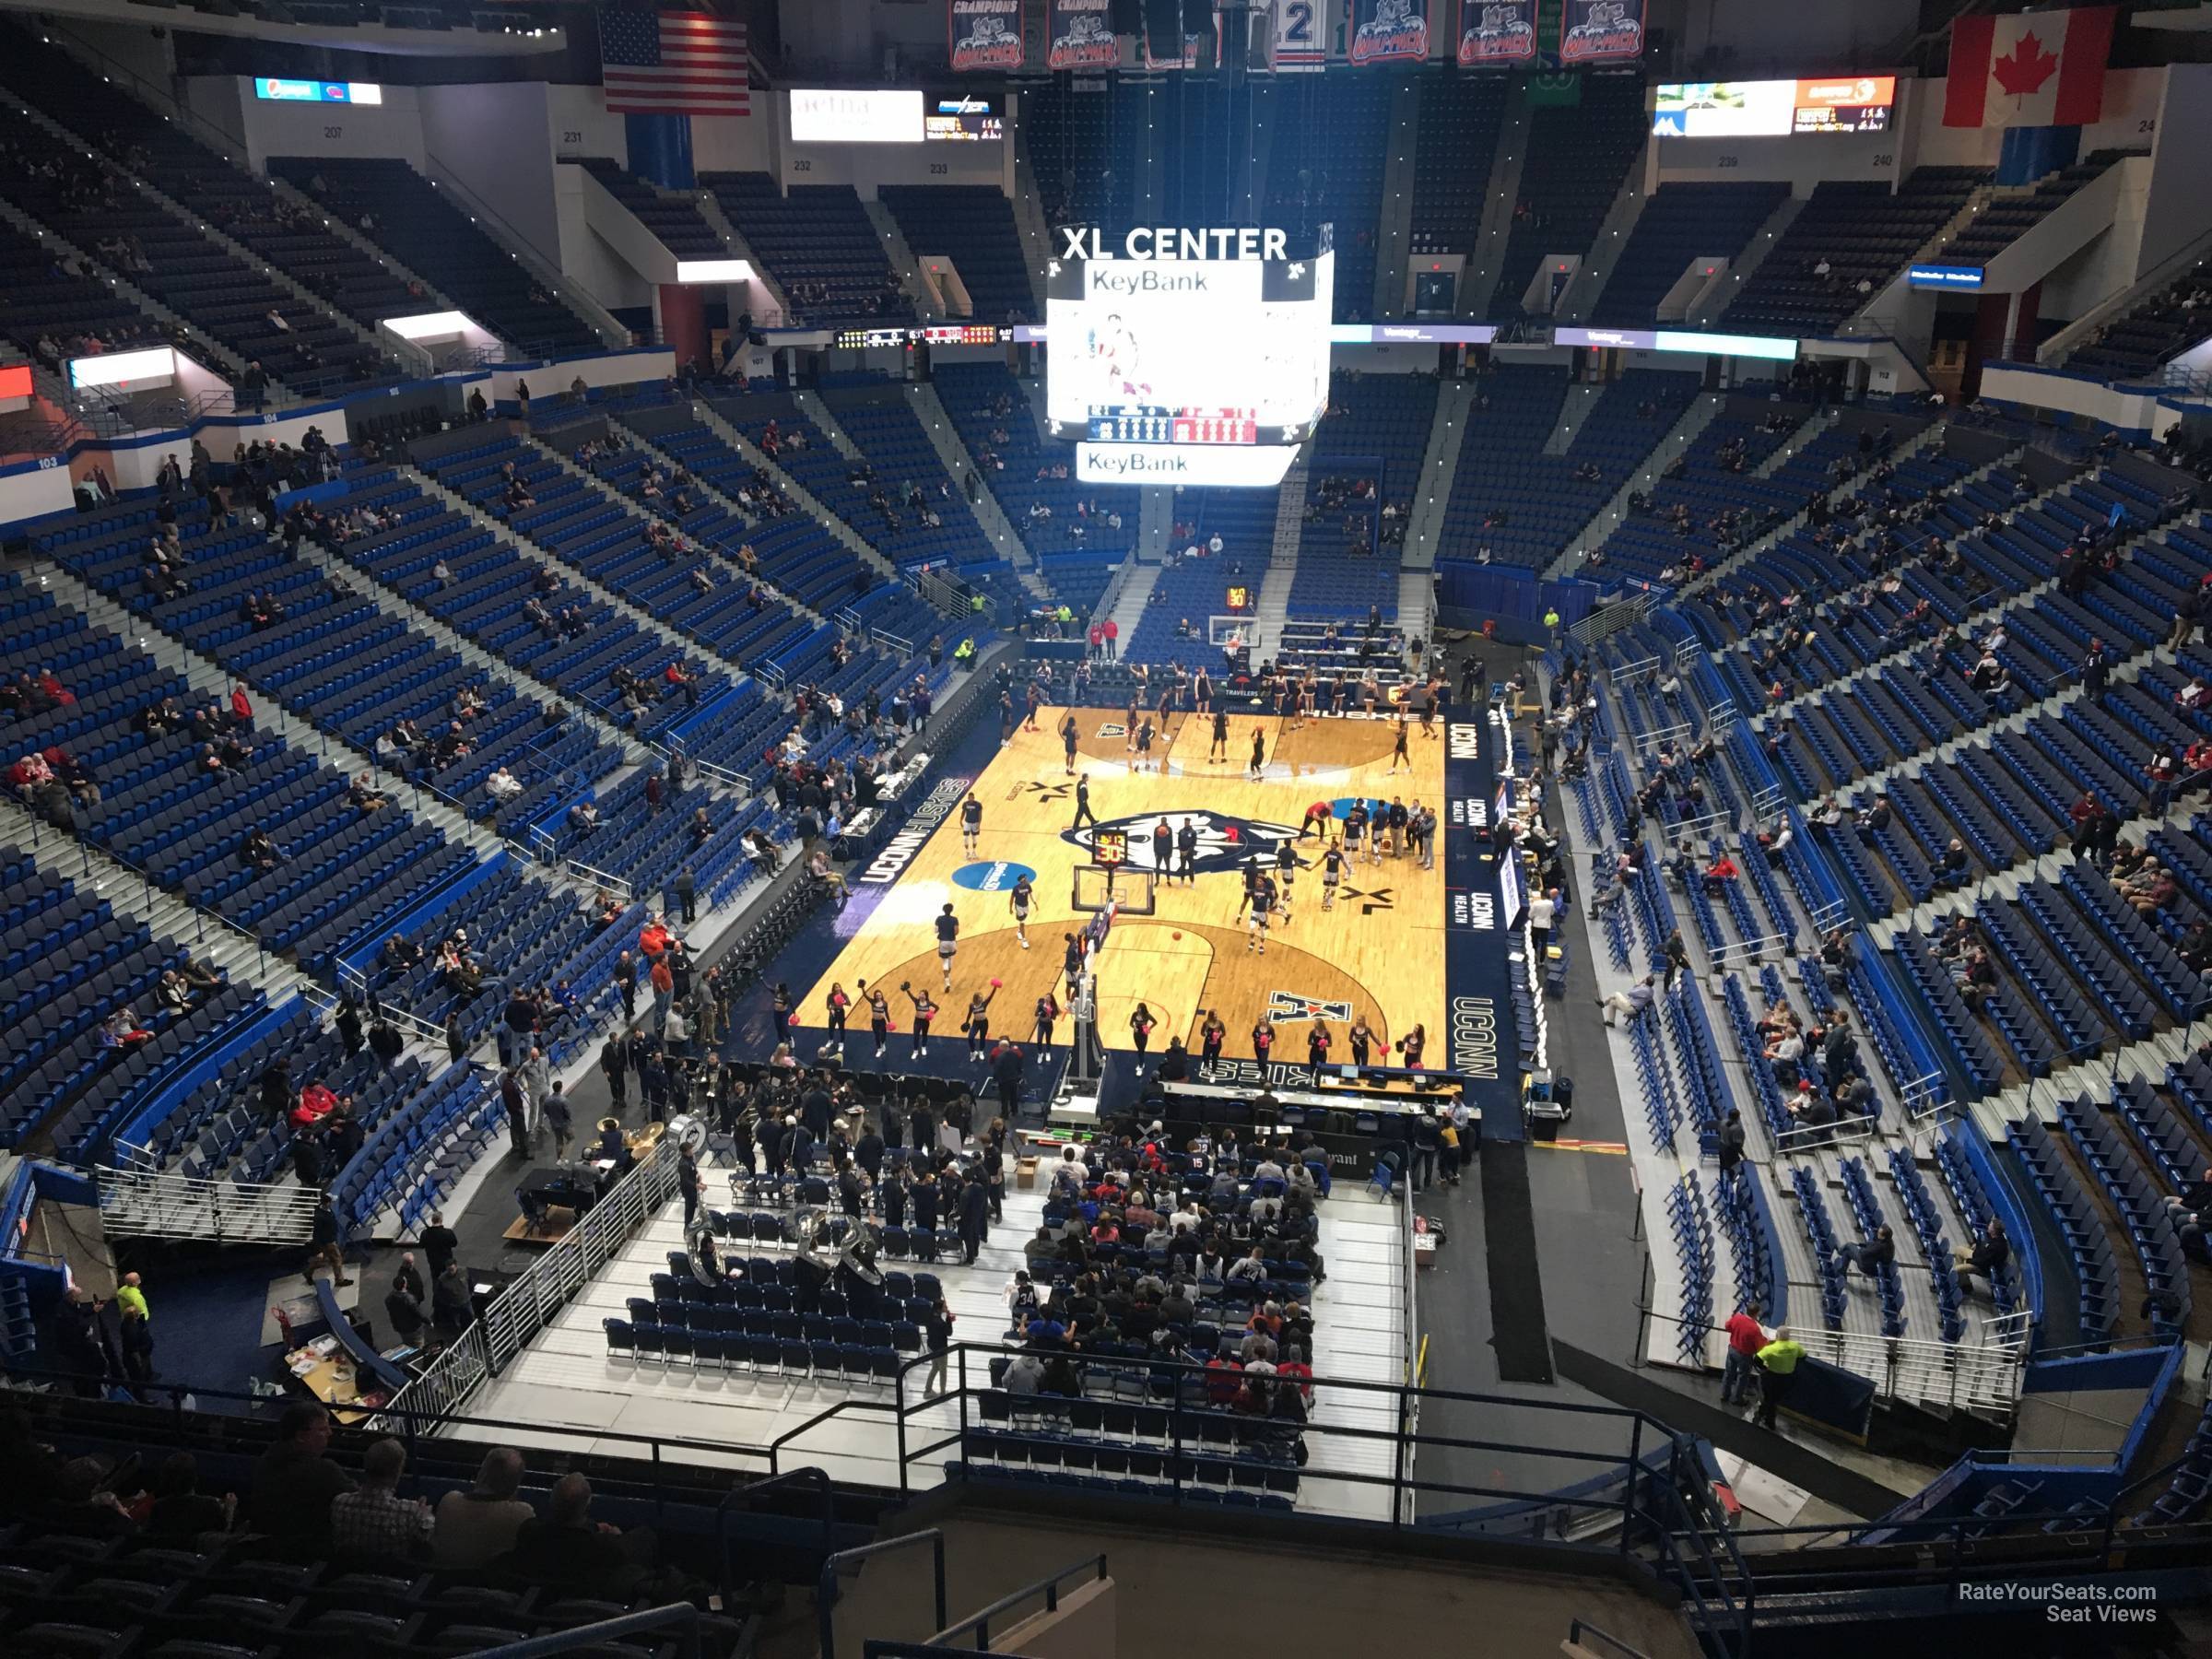 section 224, row j seat view  - xl center